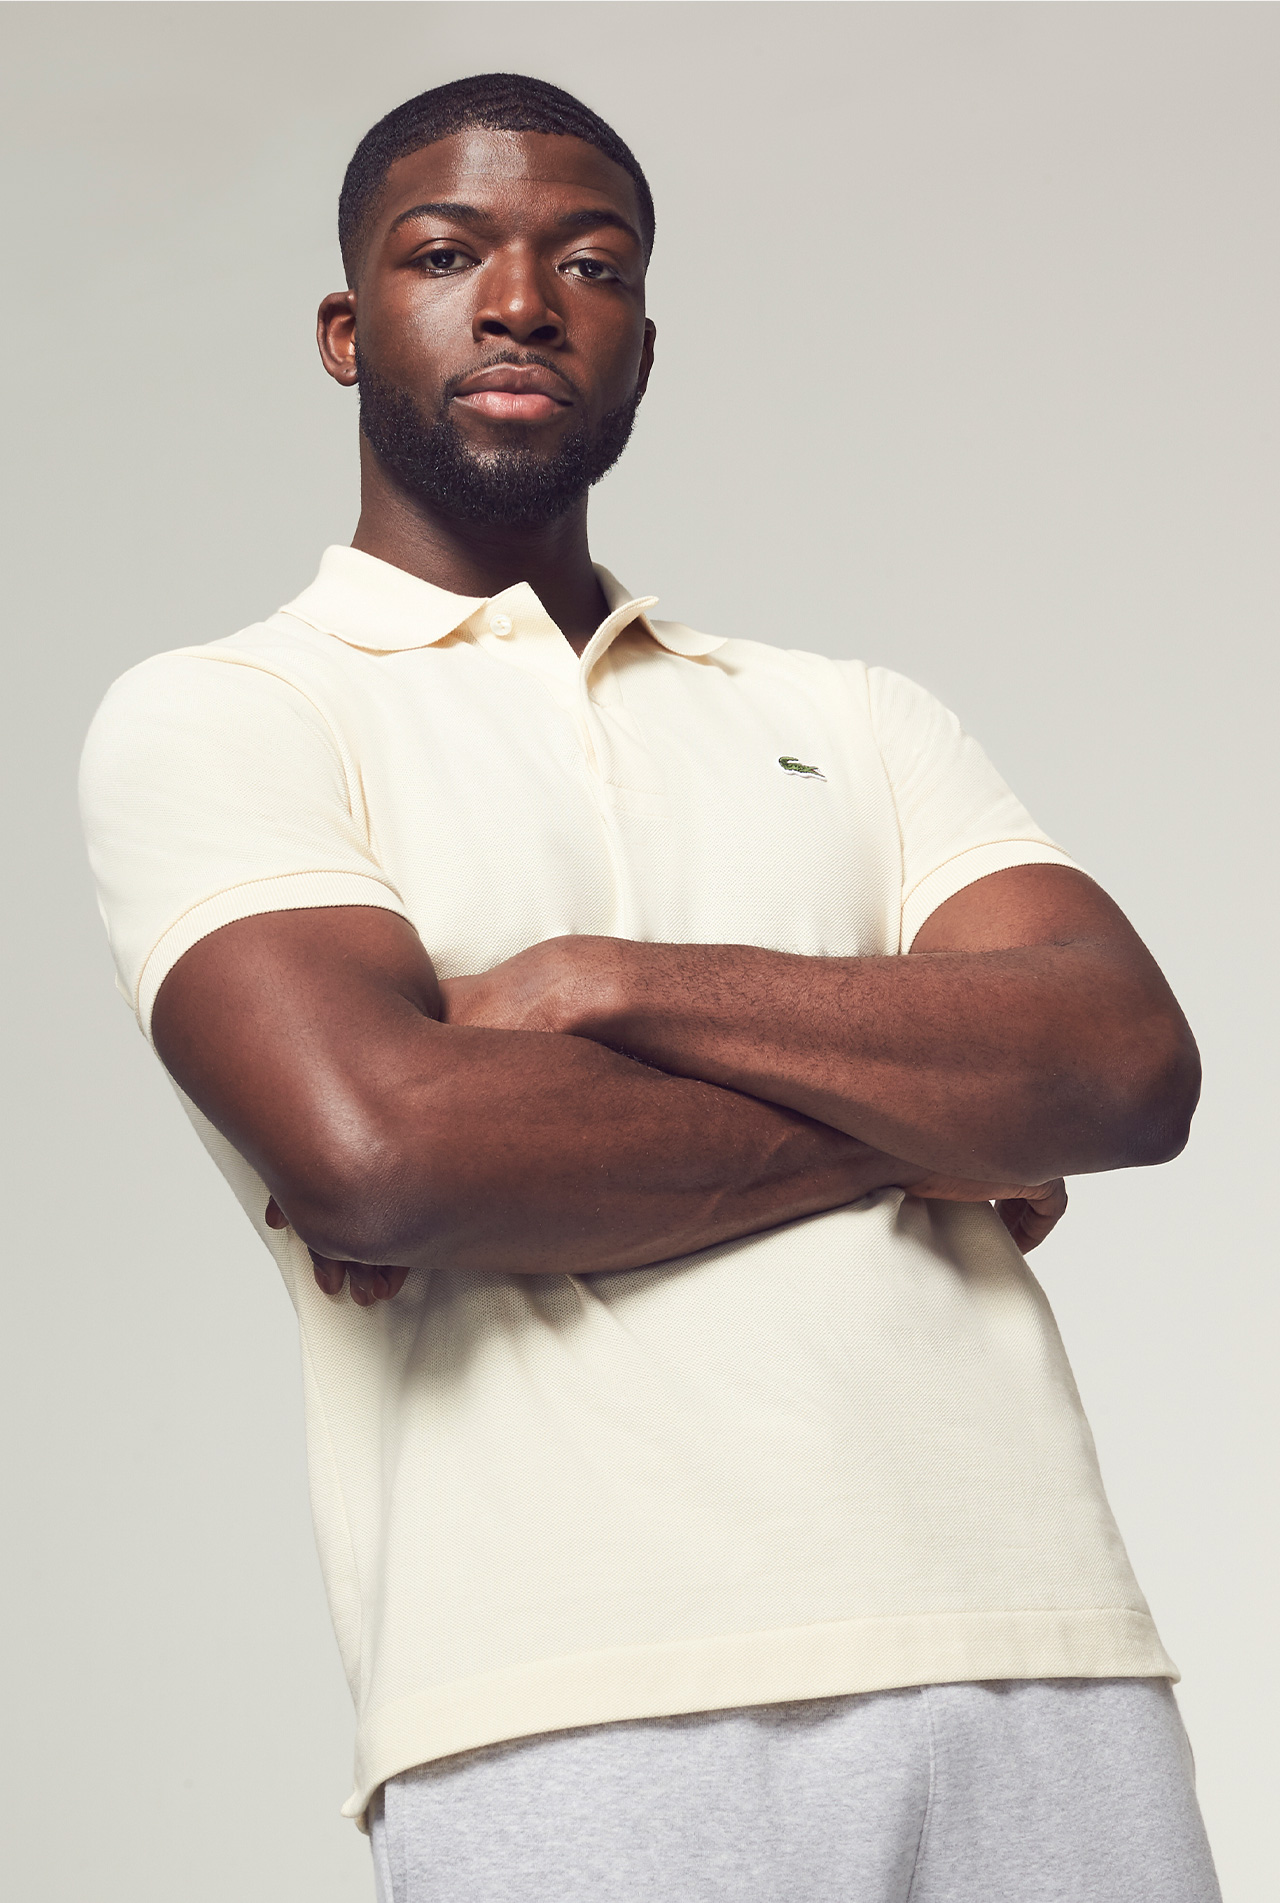 Model wearing Lacoste clothes